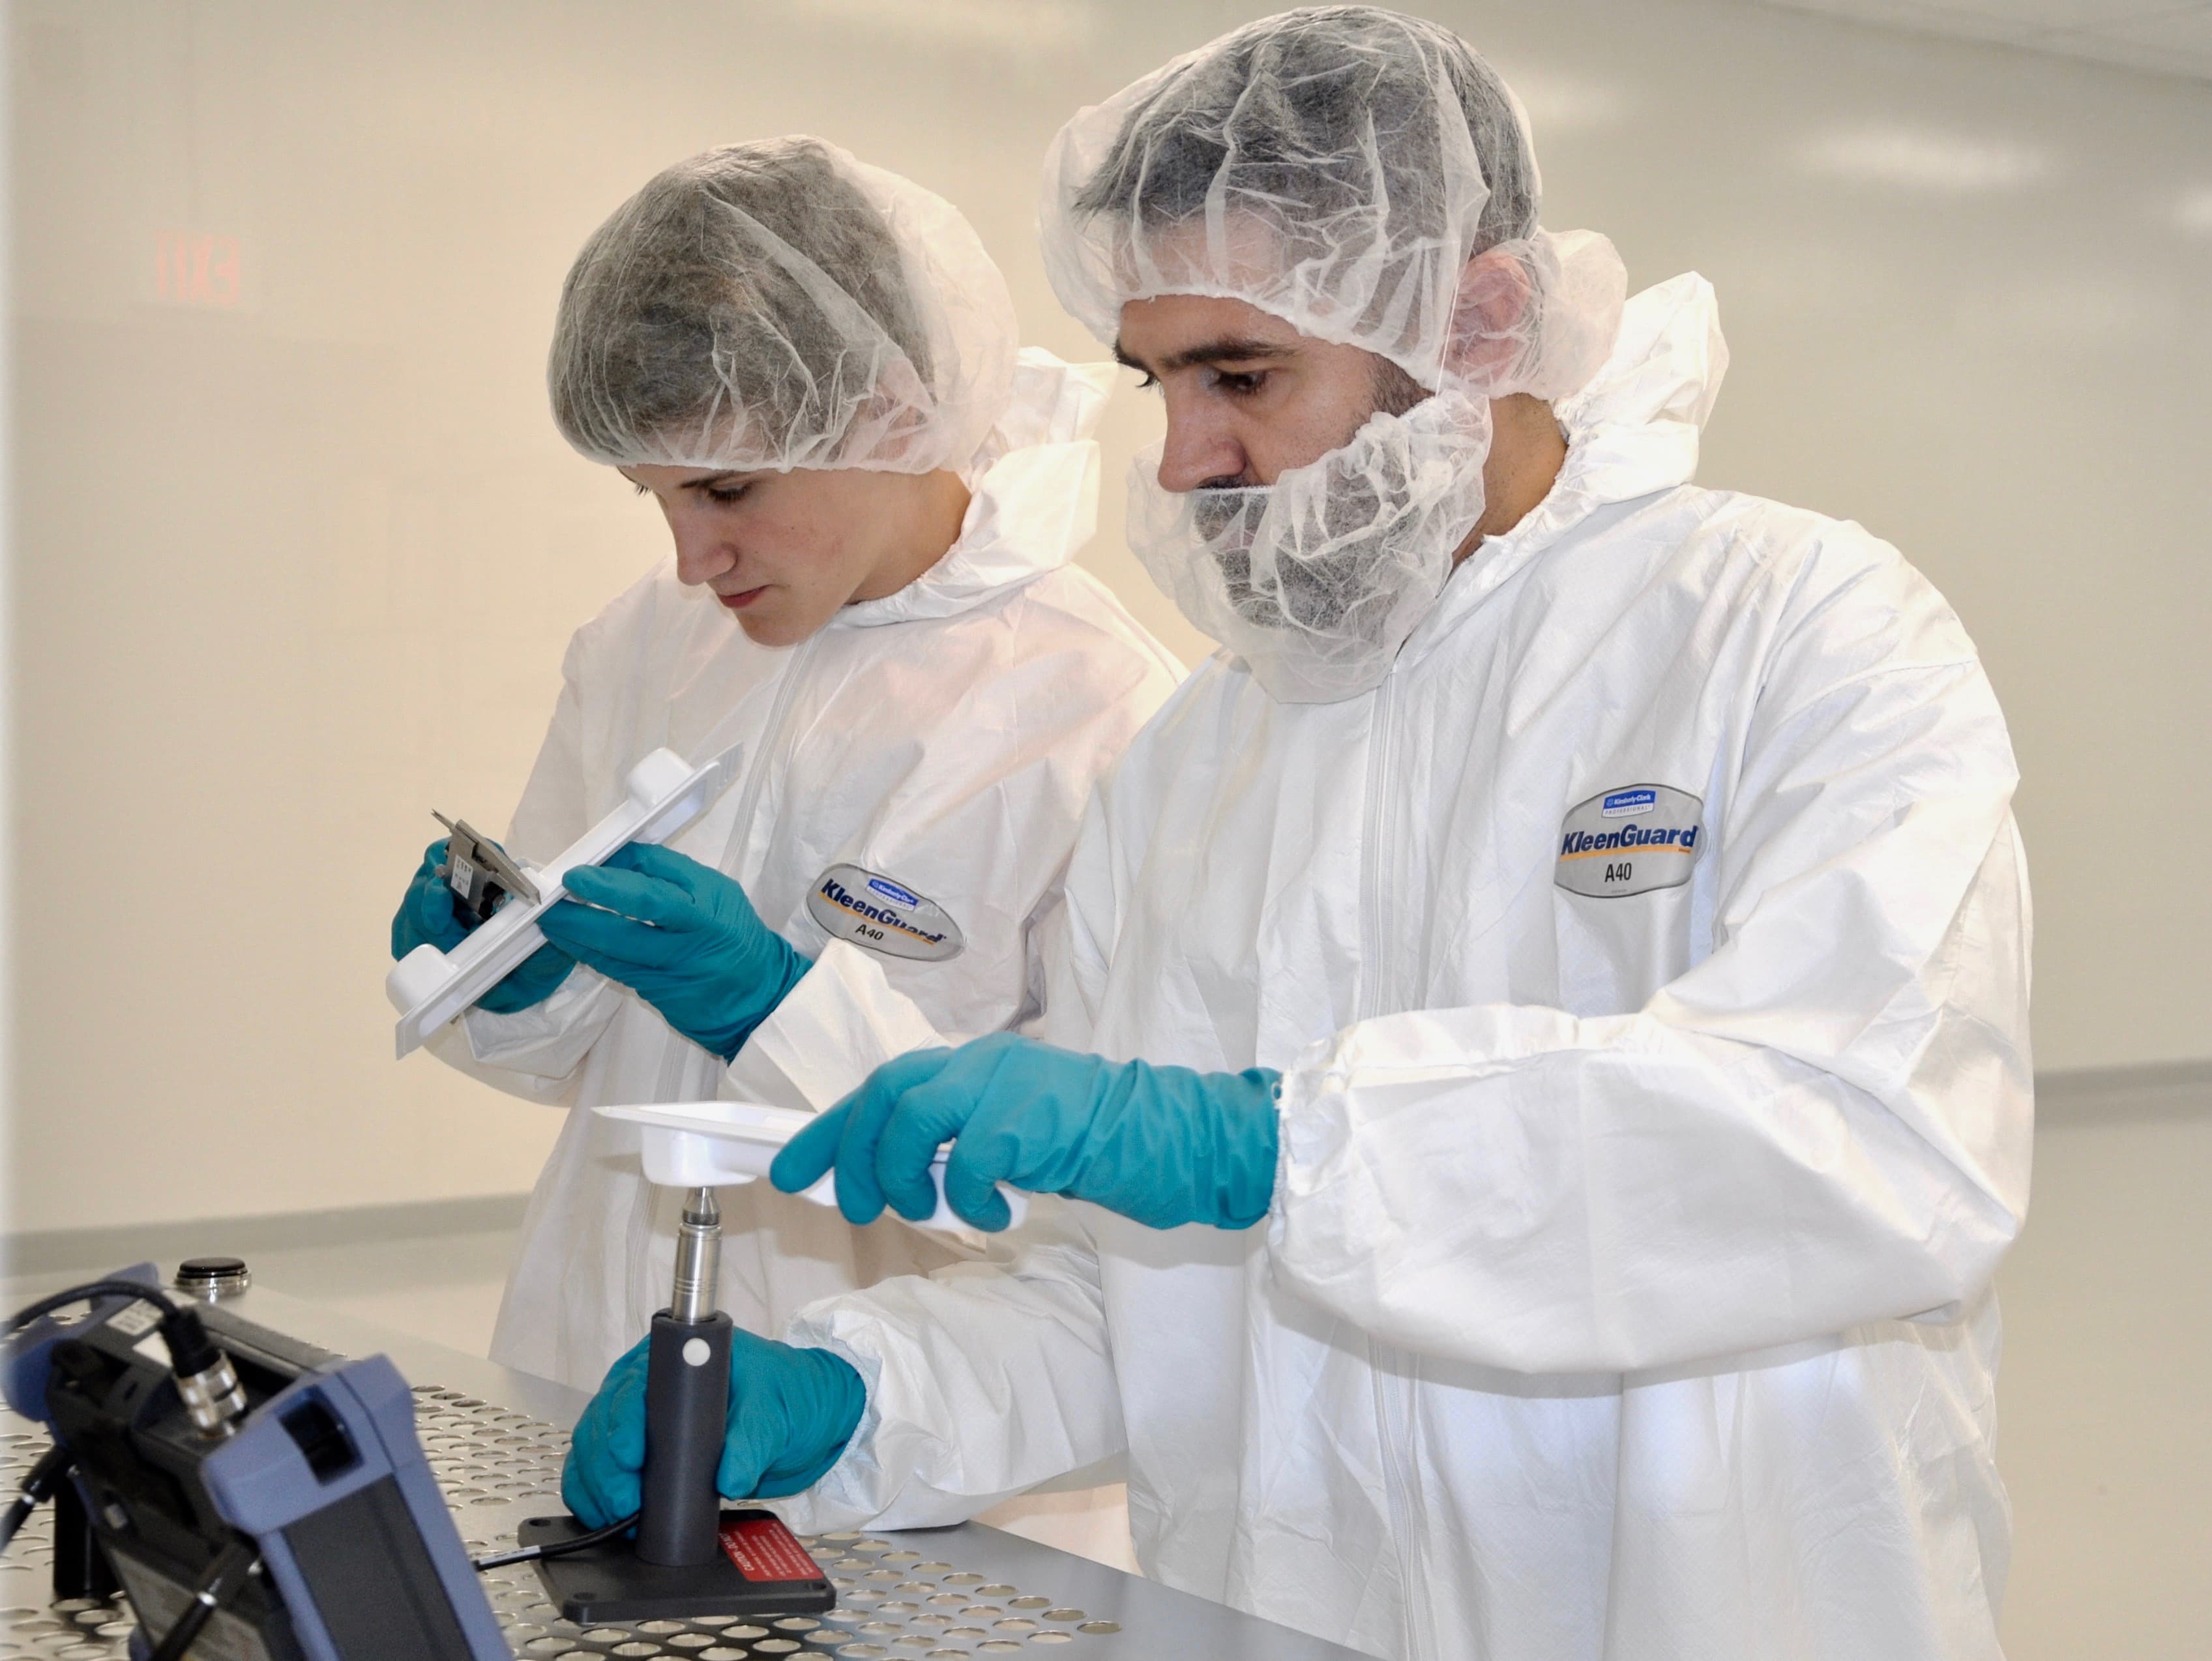 Quality control in Dordan's cleanroom